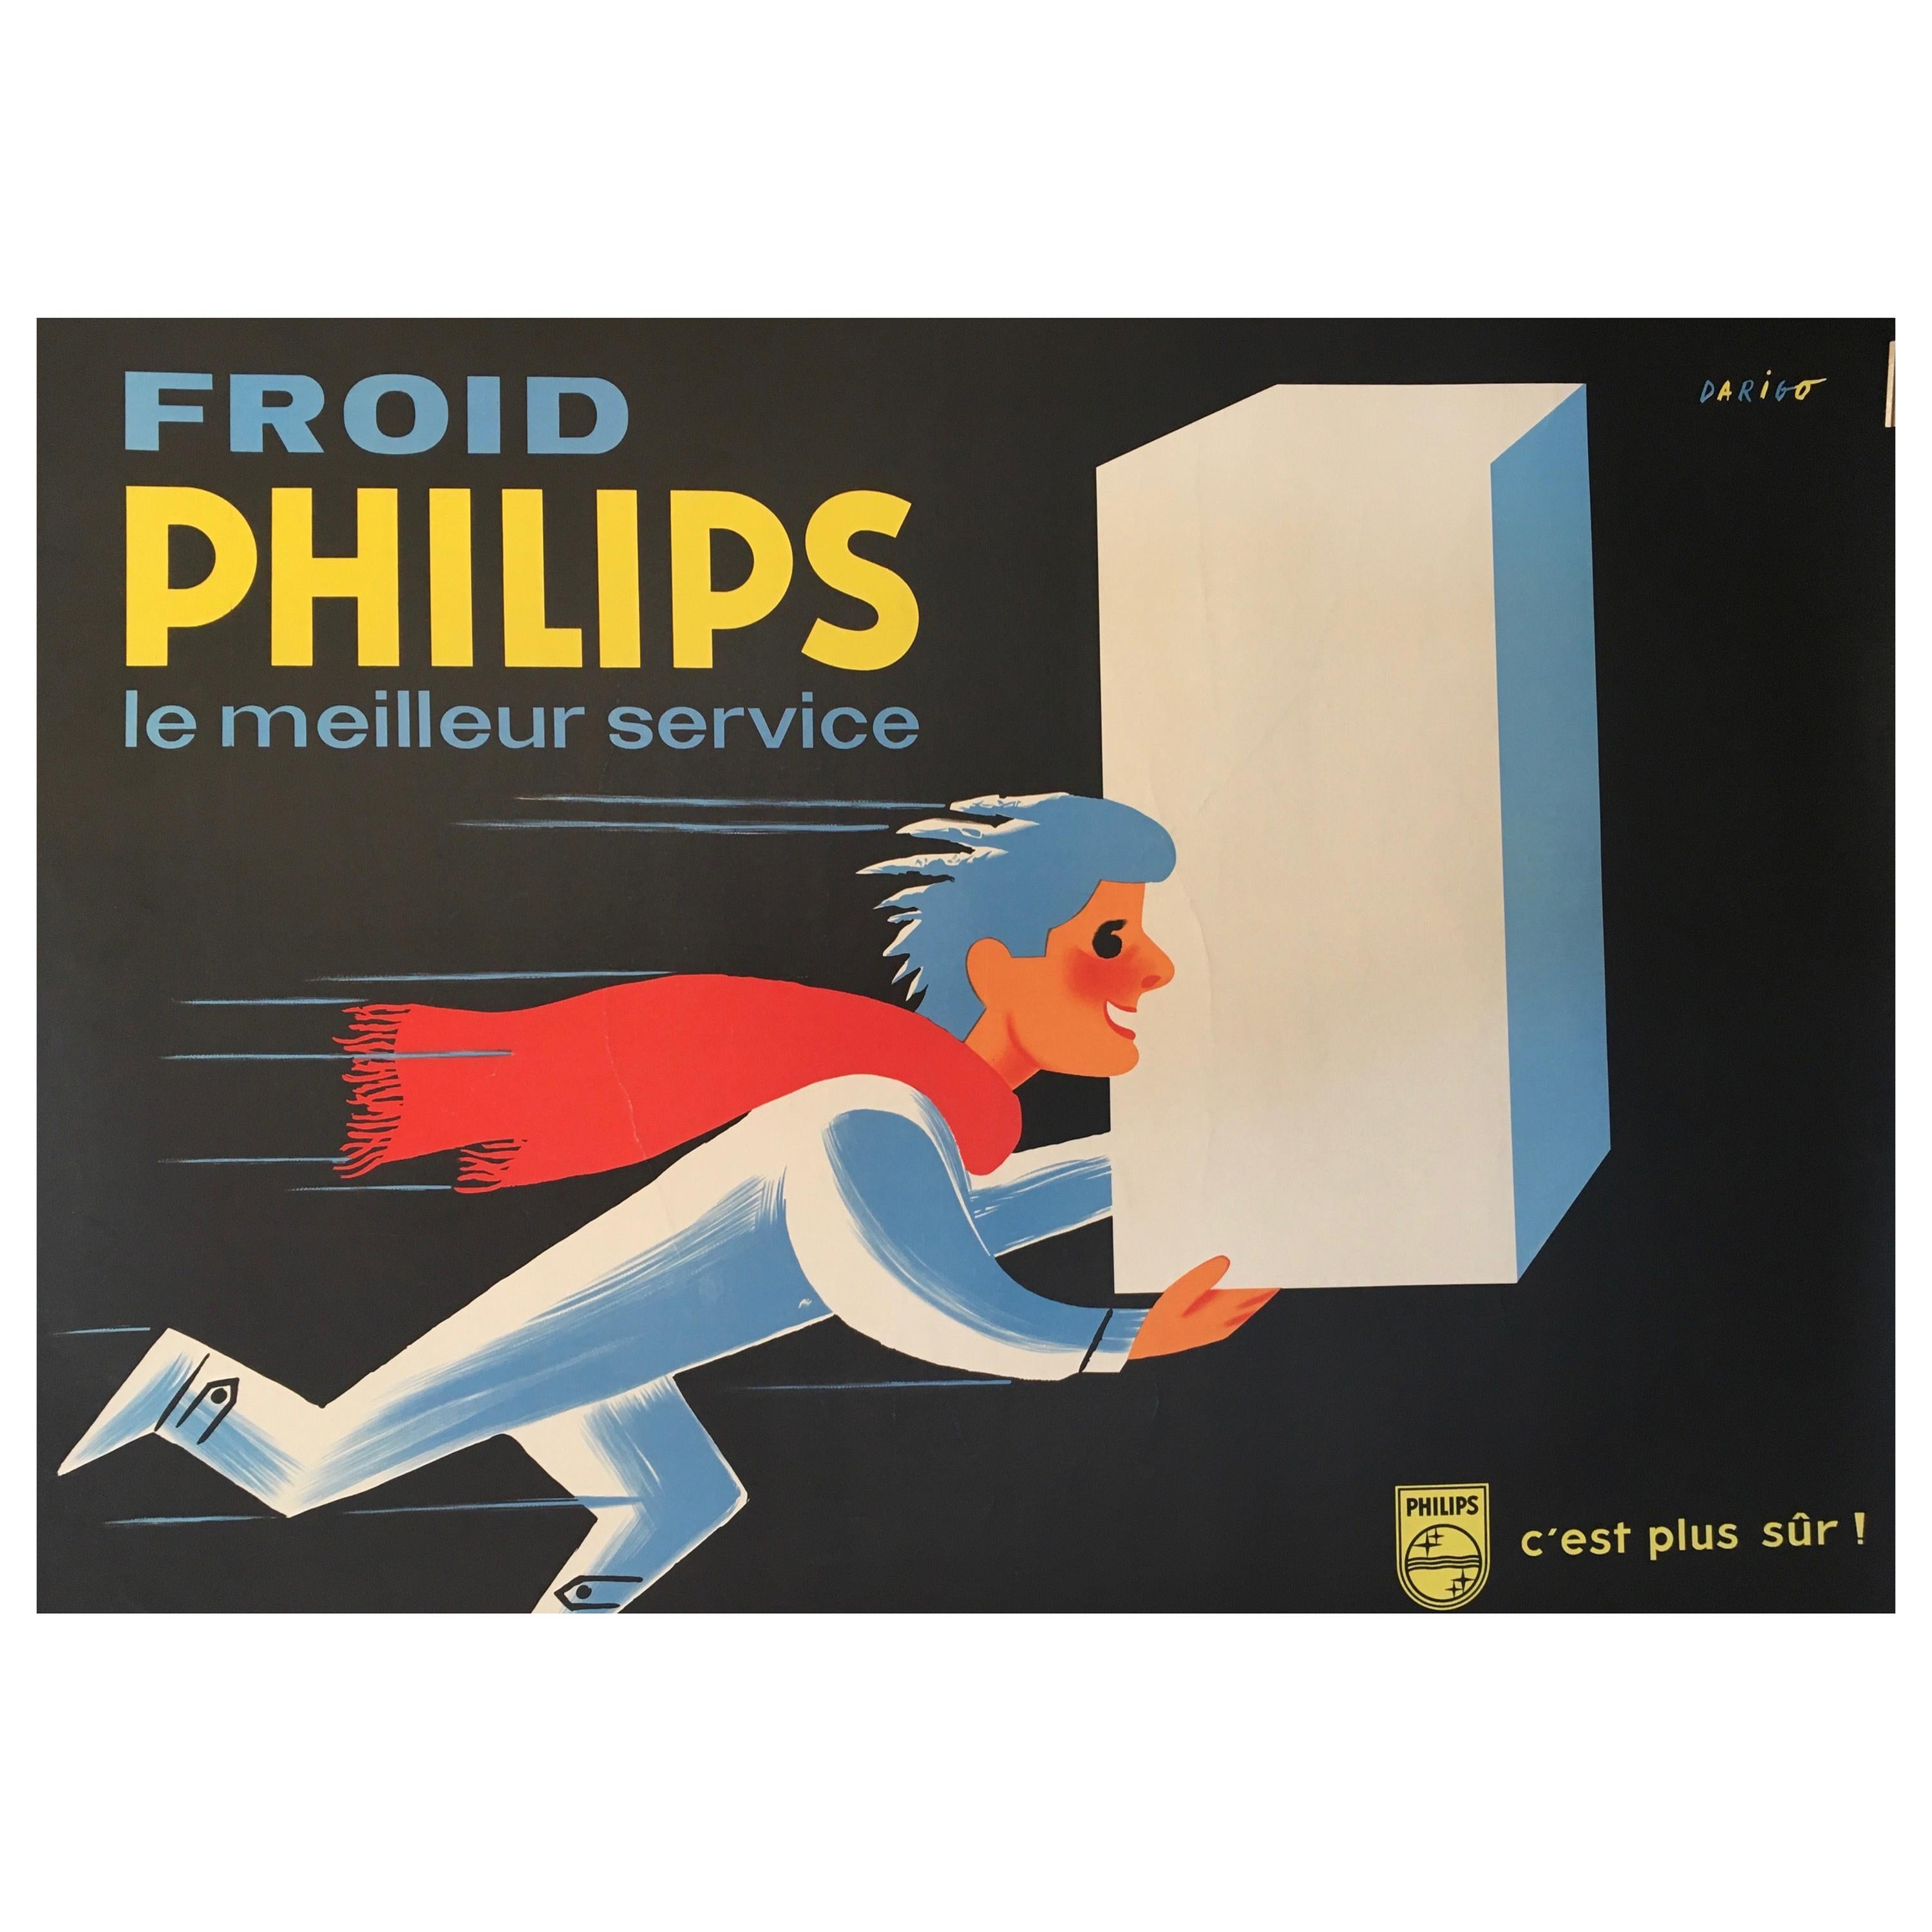 Midcentury Original Vintage French Poster, 'Froid Philips' by Darigo